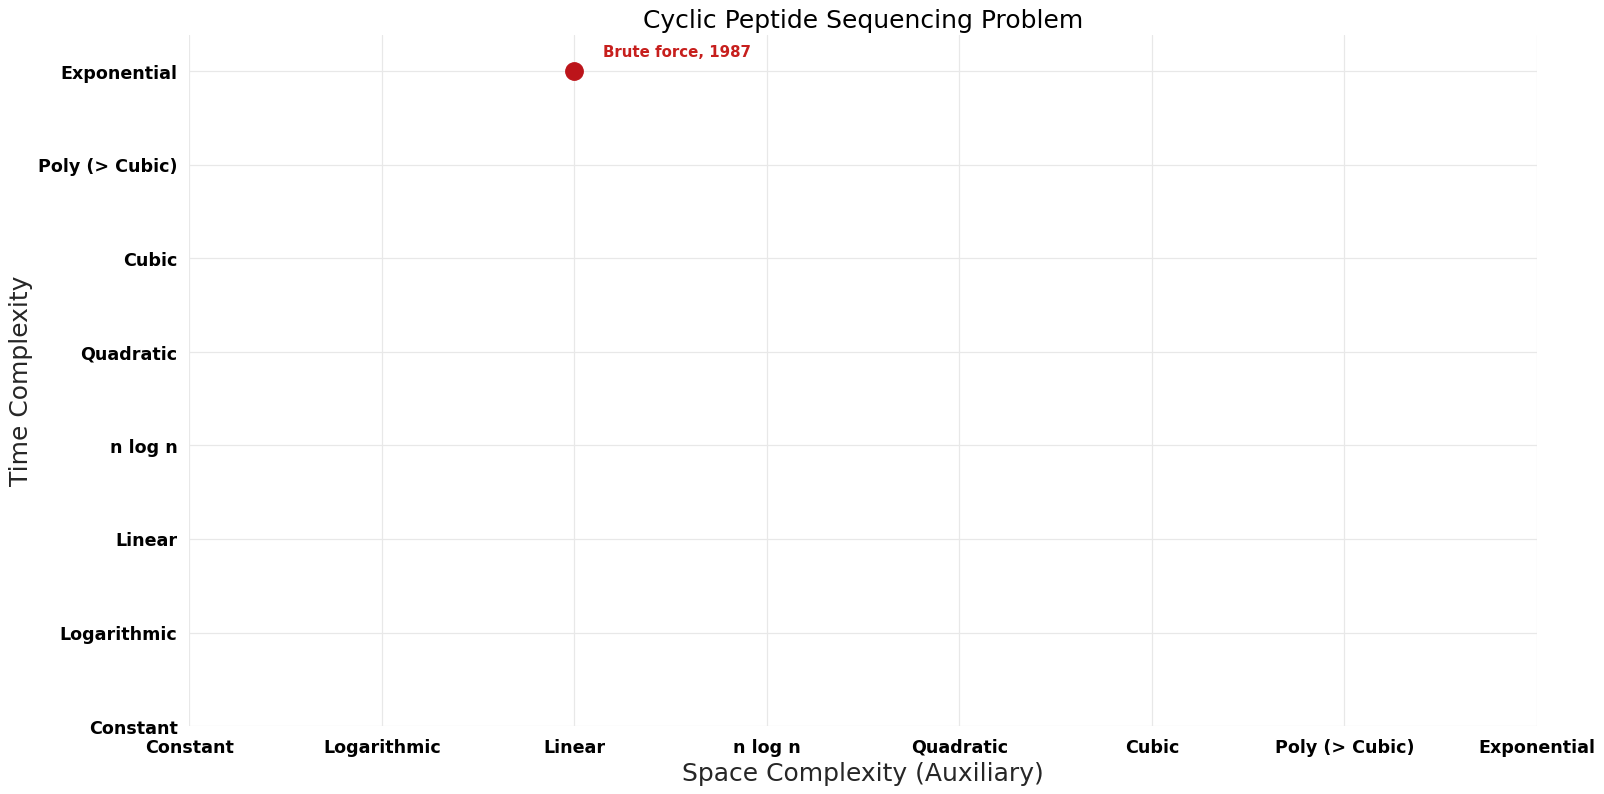 Cyclic Peptide Sequencing Problem - Pareto Frontier.png